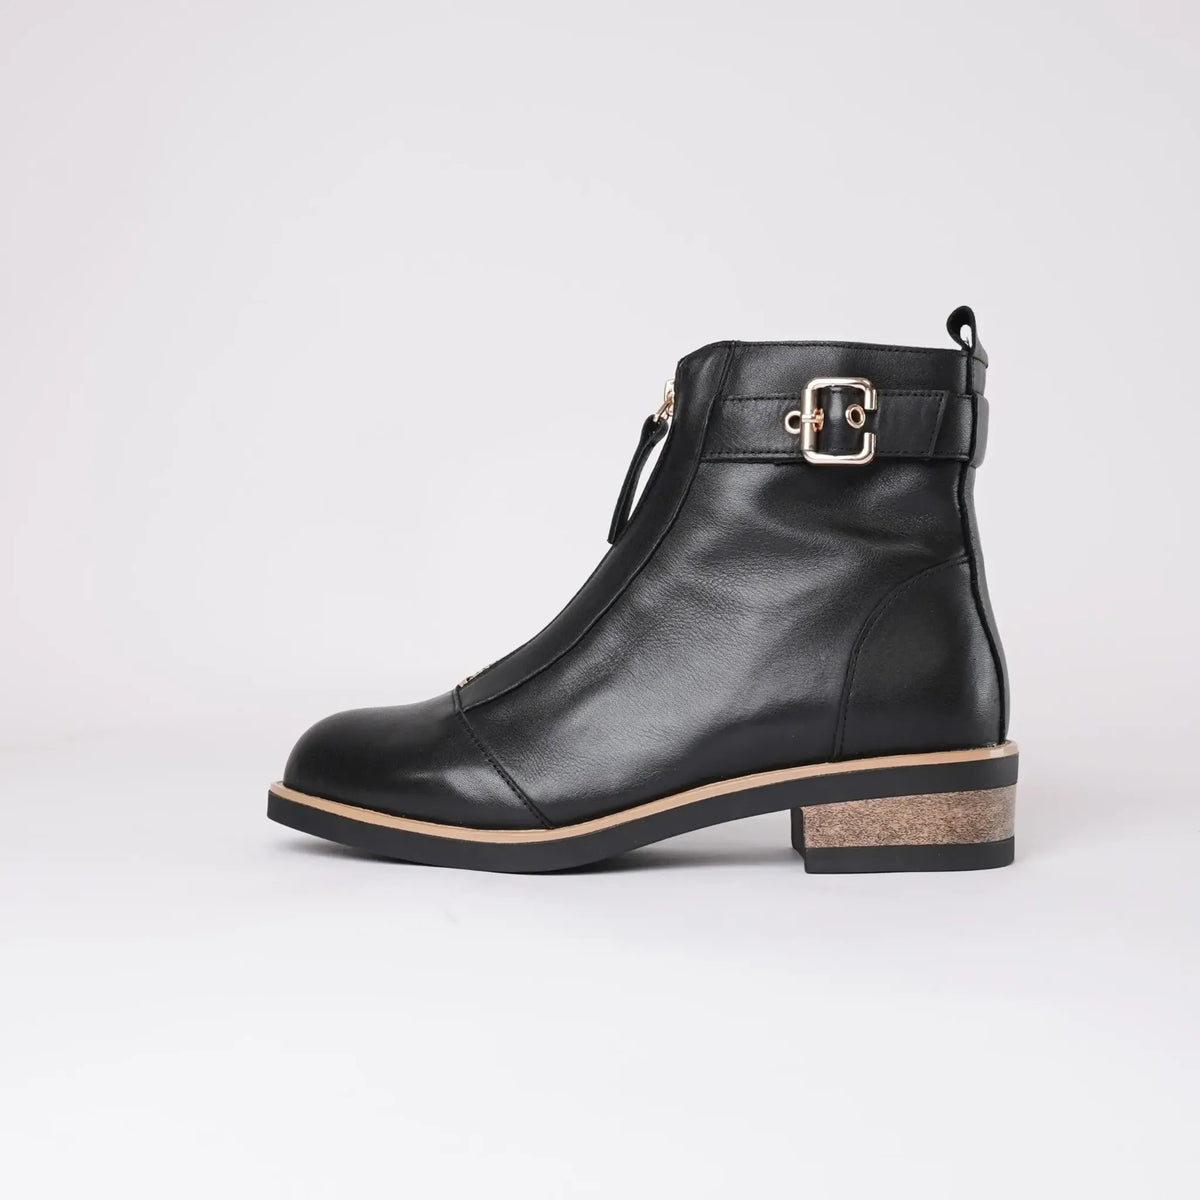 Dooley Black Leather Ankle Boots